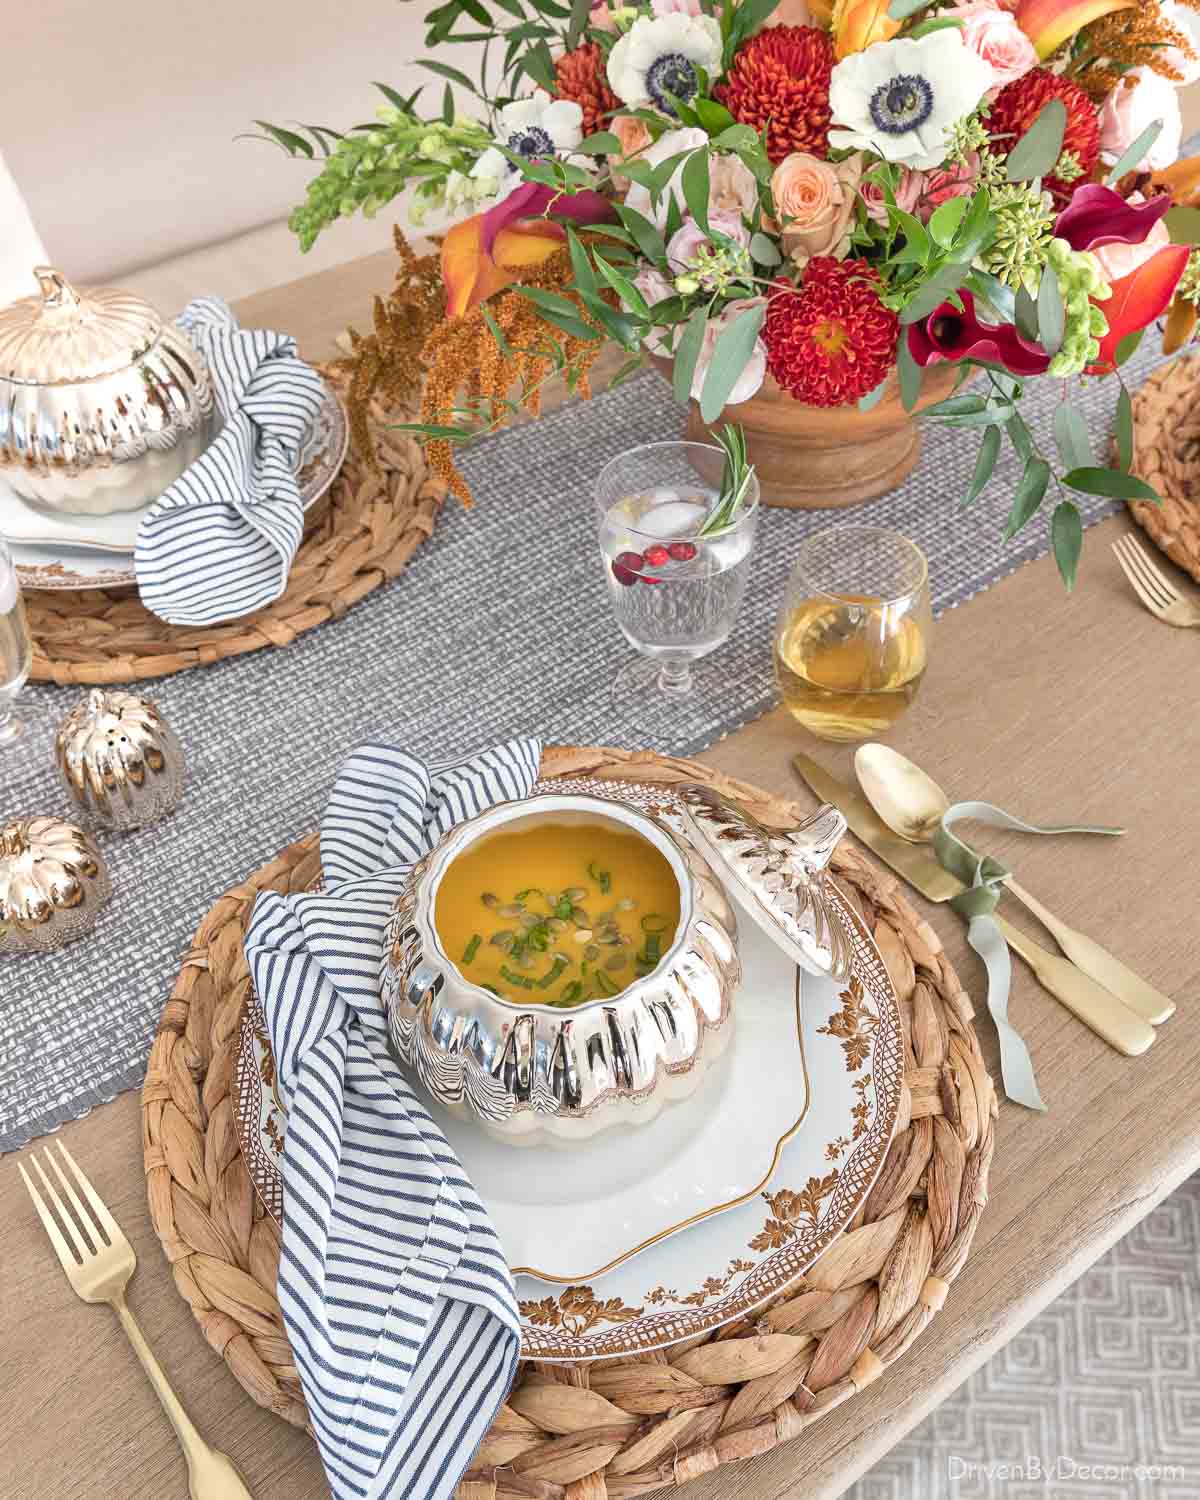 Love these simple Thanksgiving table decor ideas like tying your napkins in a knot!